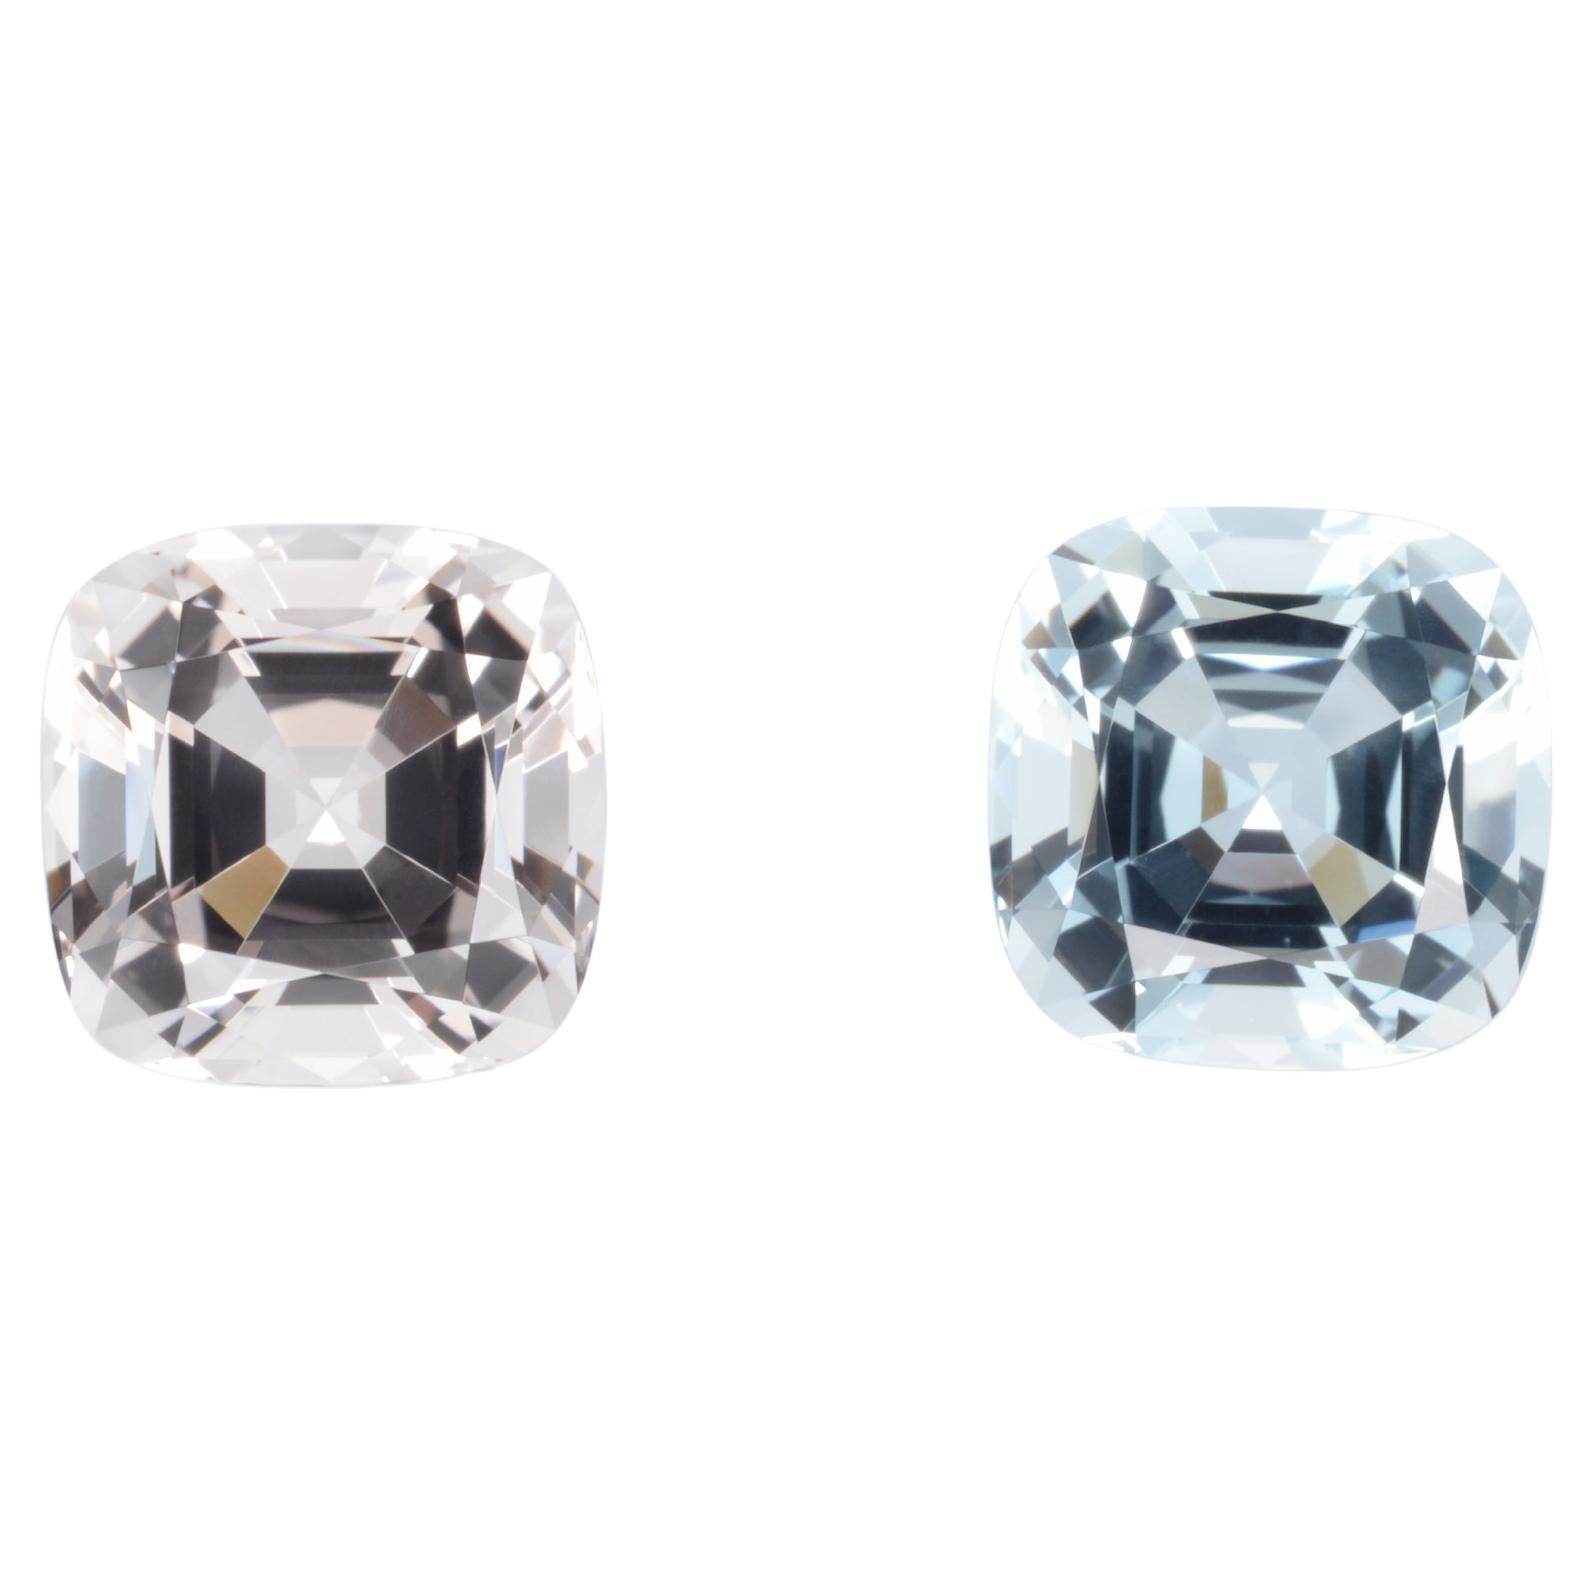 Aquamarine Morganite Earrings Pair 7.04 Carat Cushion Cut Loose Gems In New Condition For Sale In Beverly Hills, CA